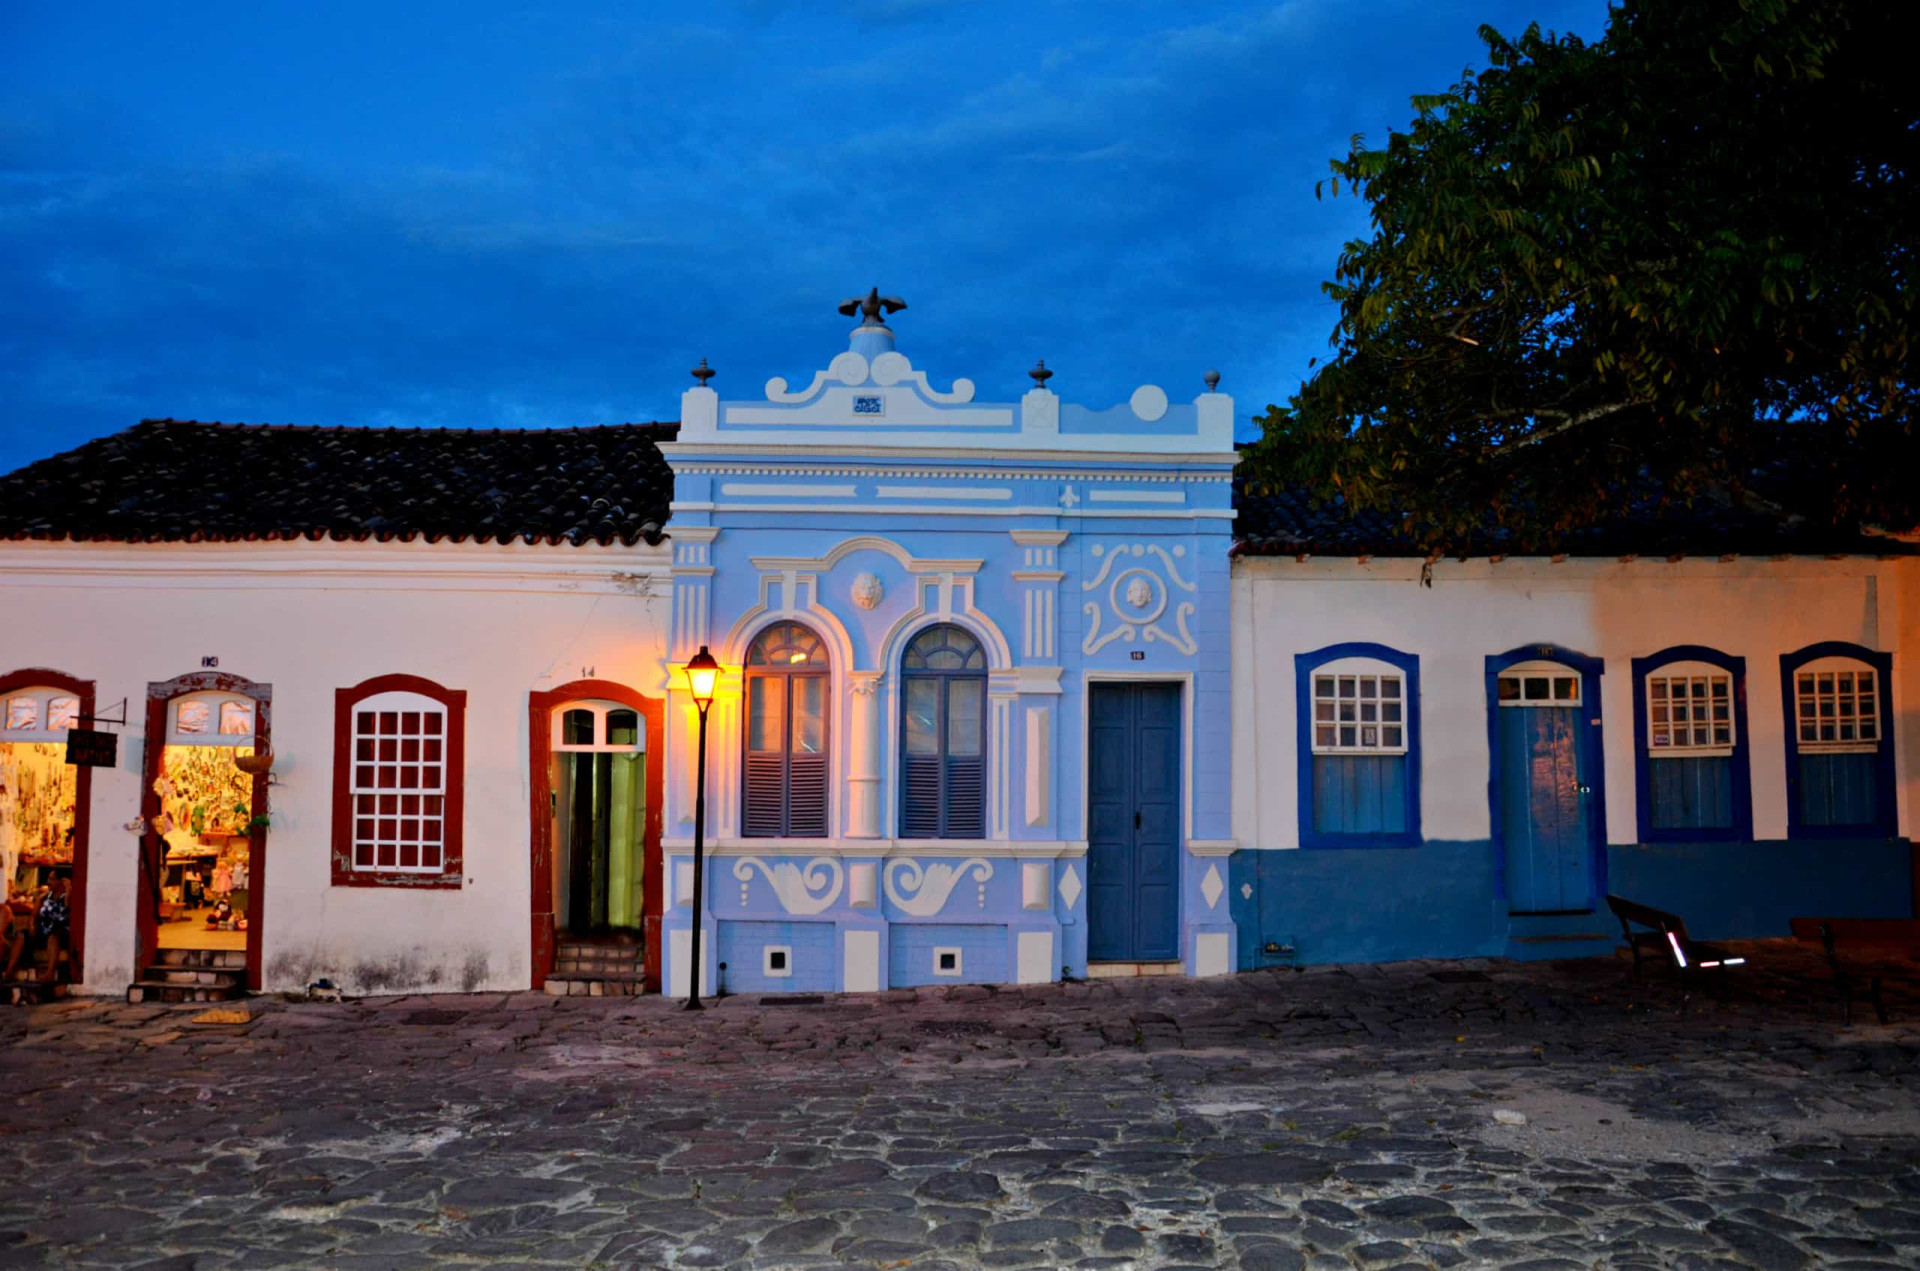 Location: Goiás<br>Criteria: Cultural<br>Year established: 2001<br>Description: Goiás was founded in 1727 by Bartolomeu Bueno da Silva and was the former state capital up until 1937. Its colonial heritage is seen as an excellent example of a European settlement in the interior of South America.<p><a href="https://www.msn.com/en-us/community/channel/vid-7xx8mnucu55yw63we9va2gwr7uihbxwc68fxqp25x6tg4ftibpra?cvid=94631541bc0f4f89bfd59158d696ad7e">Follow us and access great exclusive content every day</a></p>